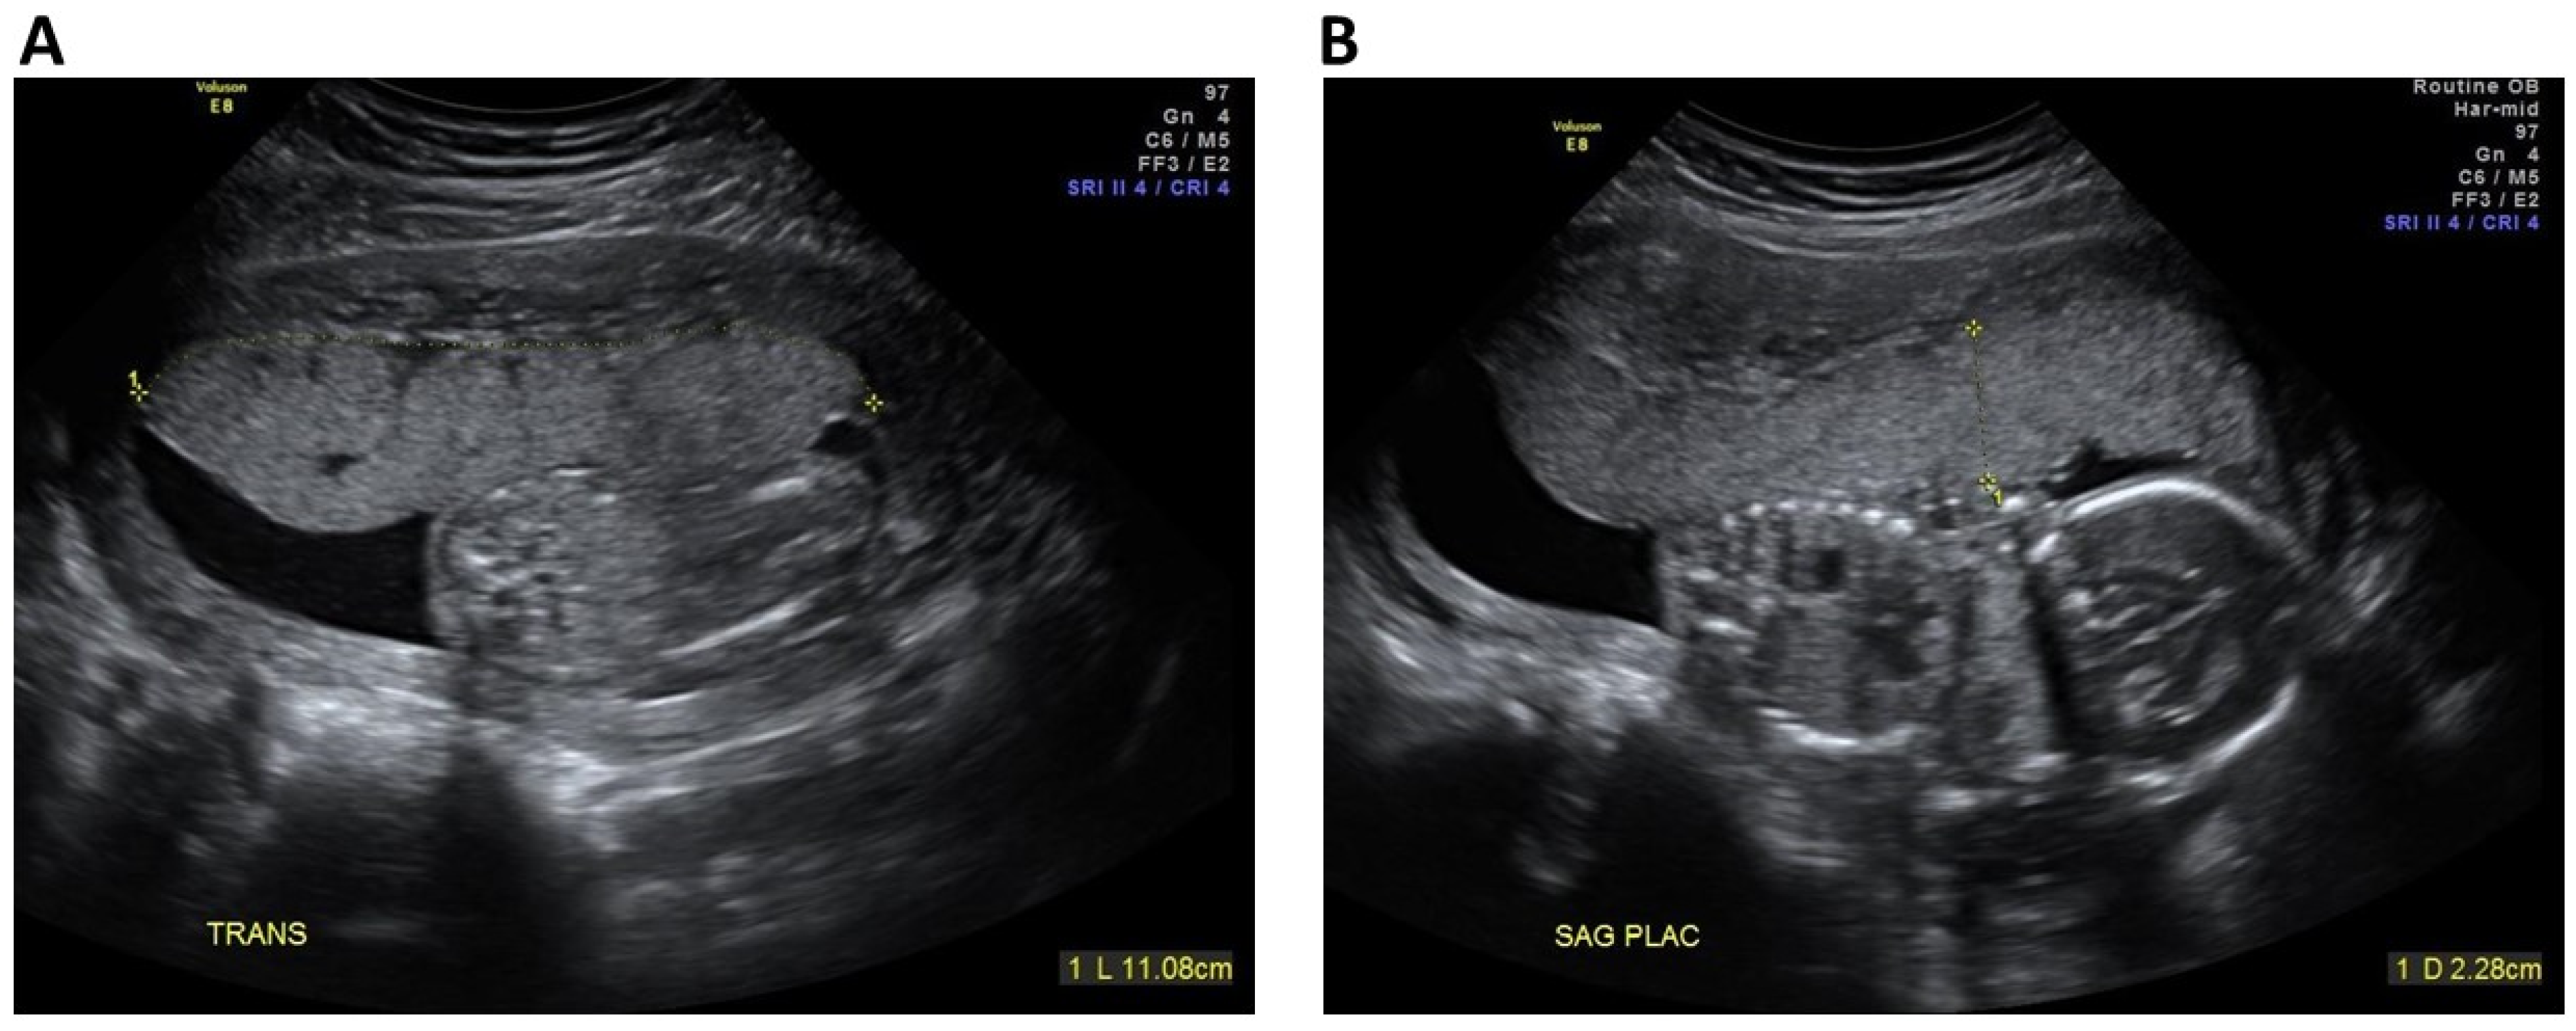 Sonographic Assessment of Fetal Growth Abnormalities